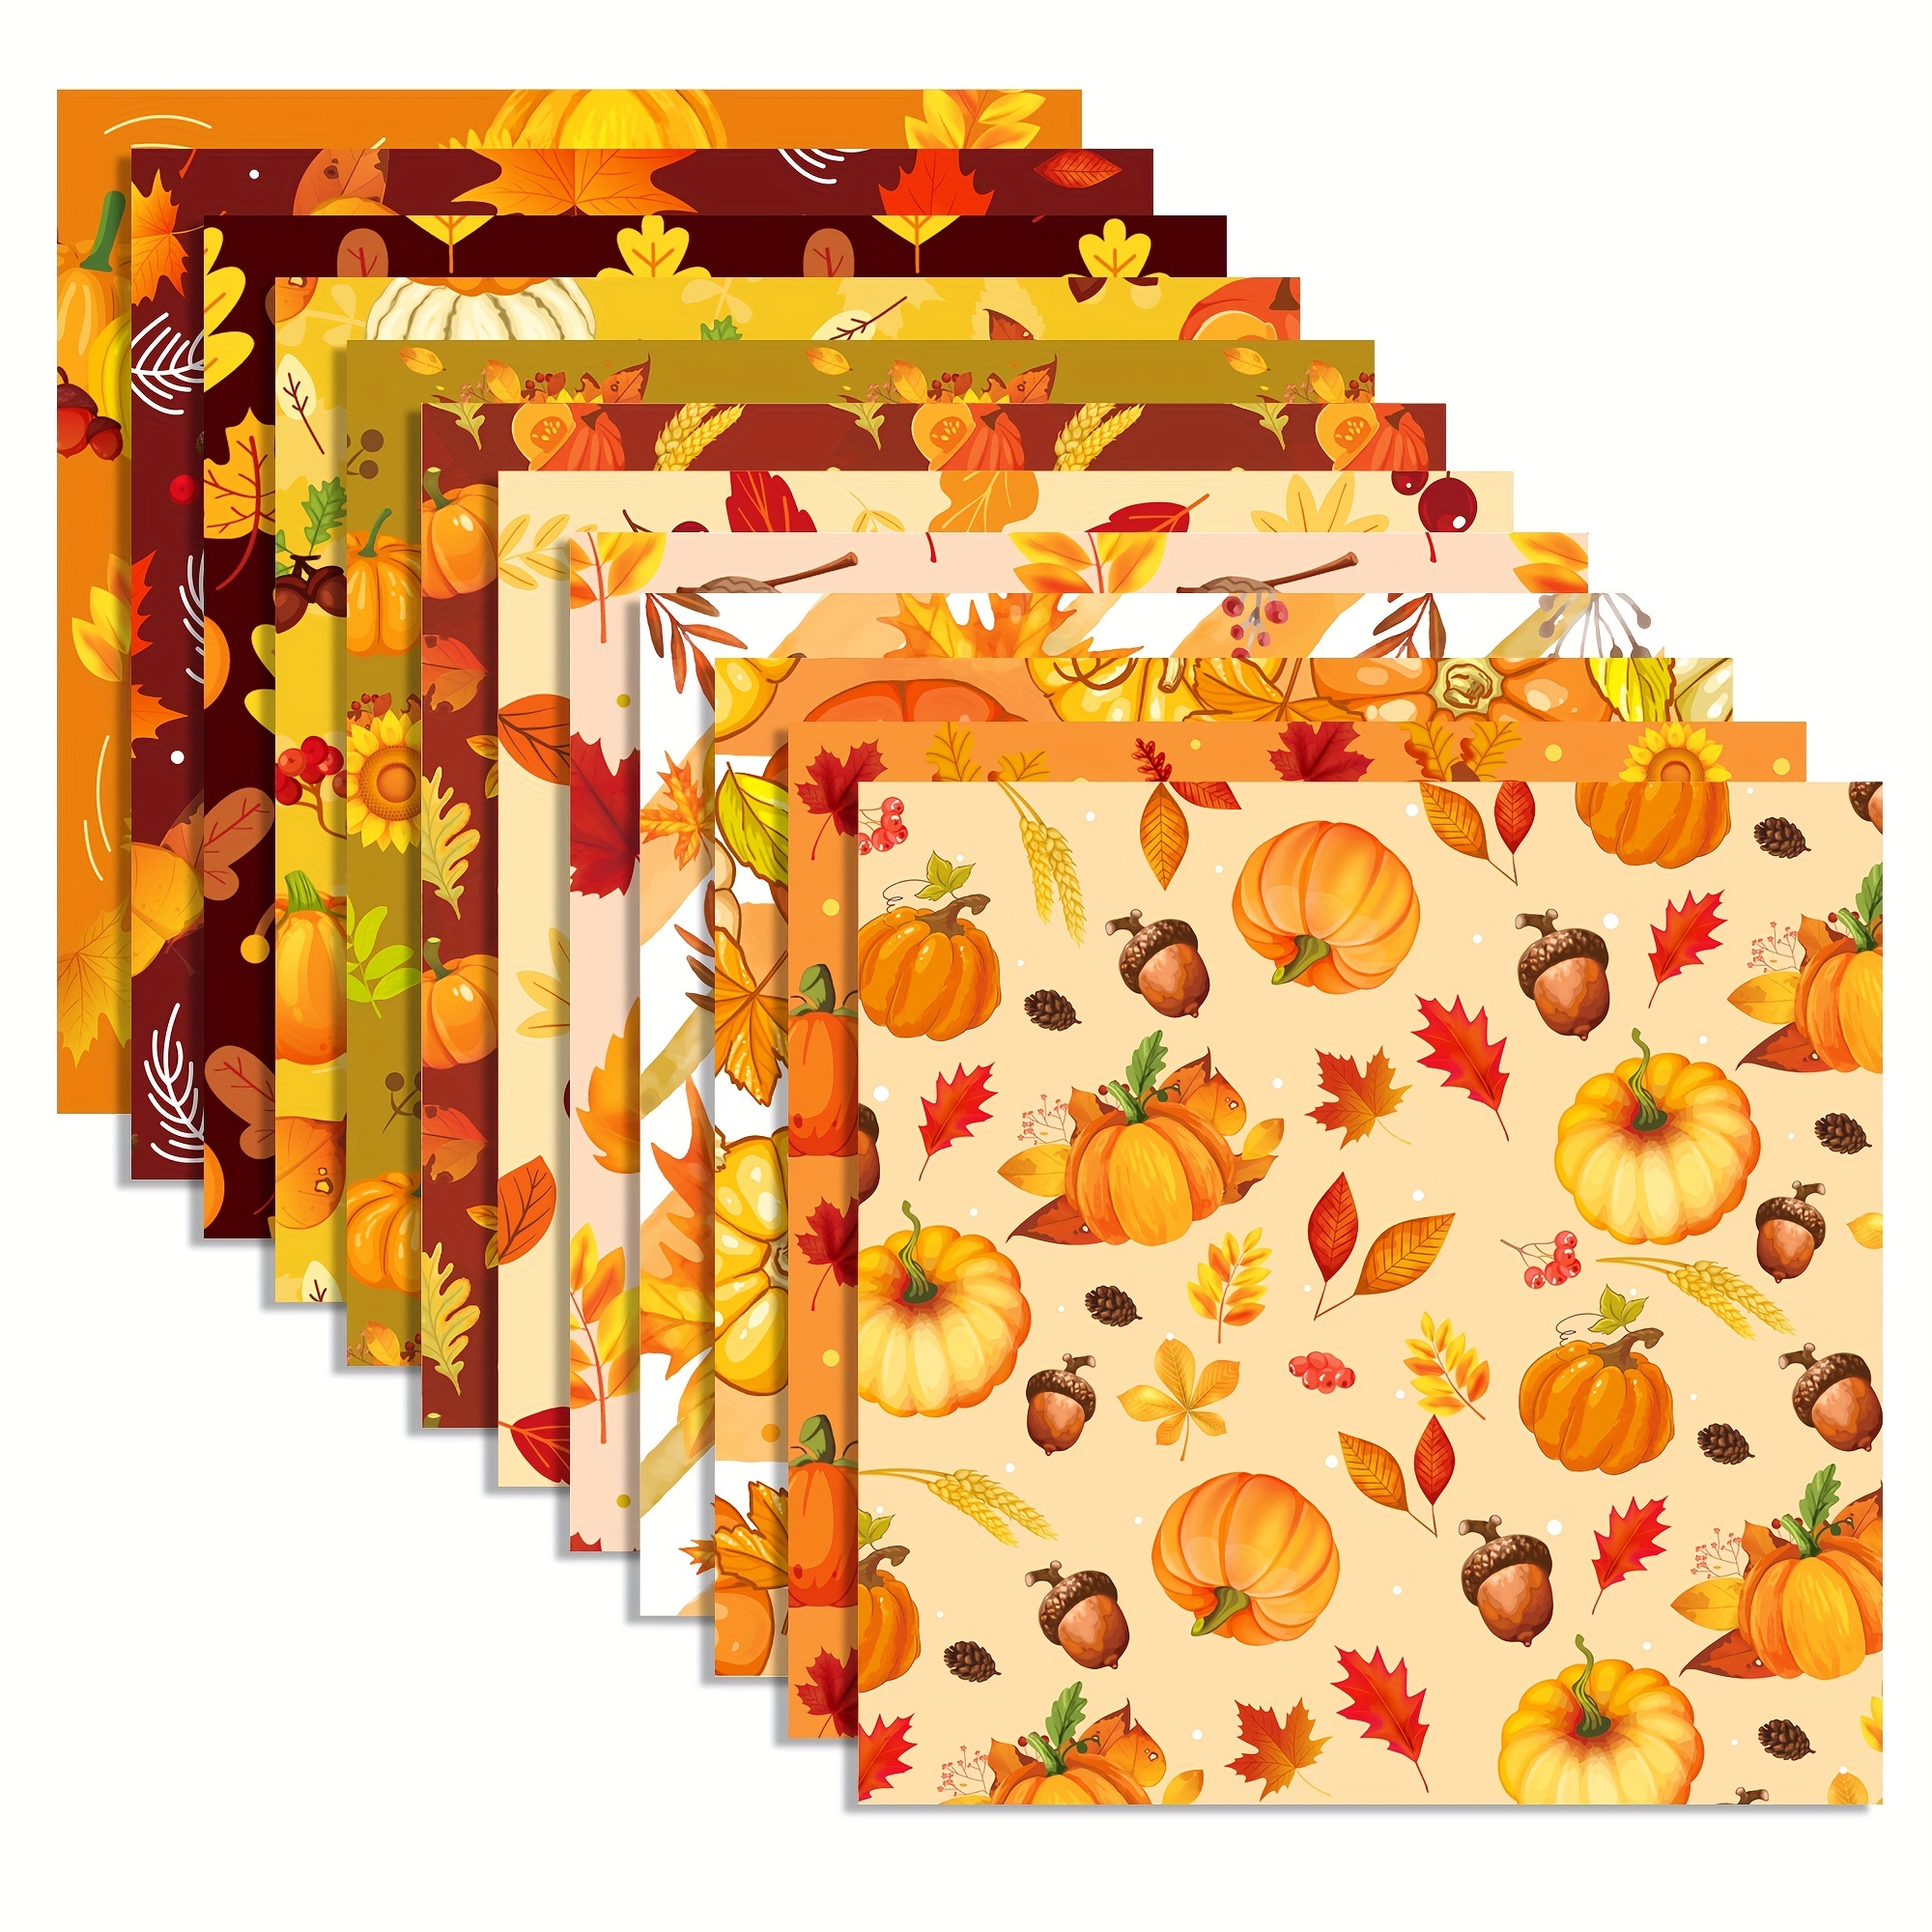  Harvest - Patterned Cardstock Paper Pad - Double